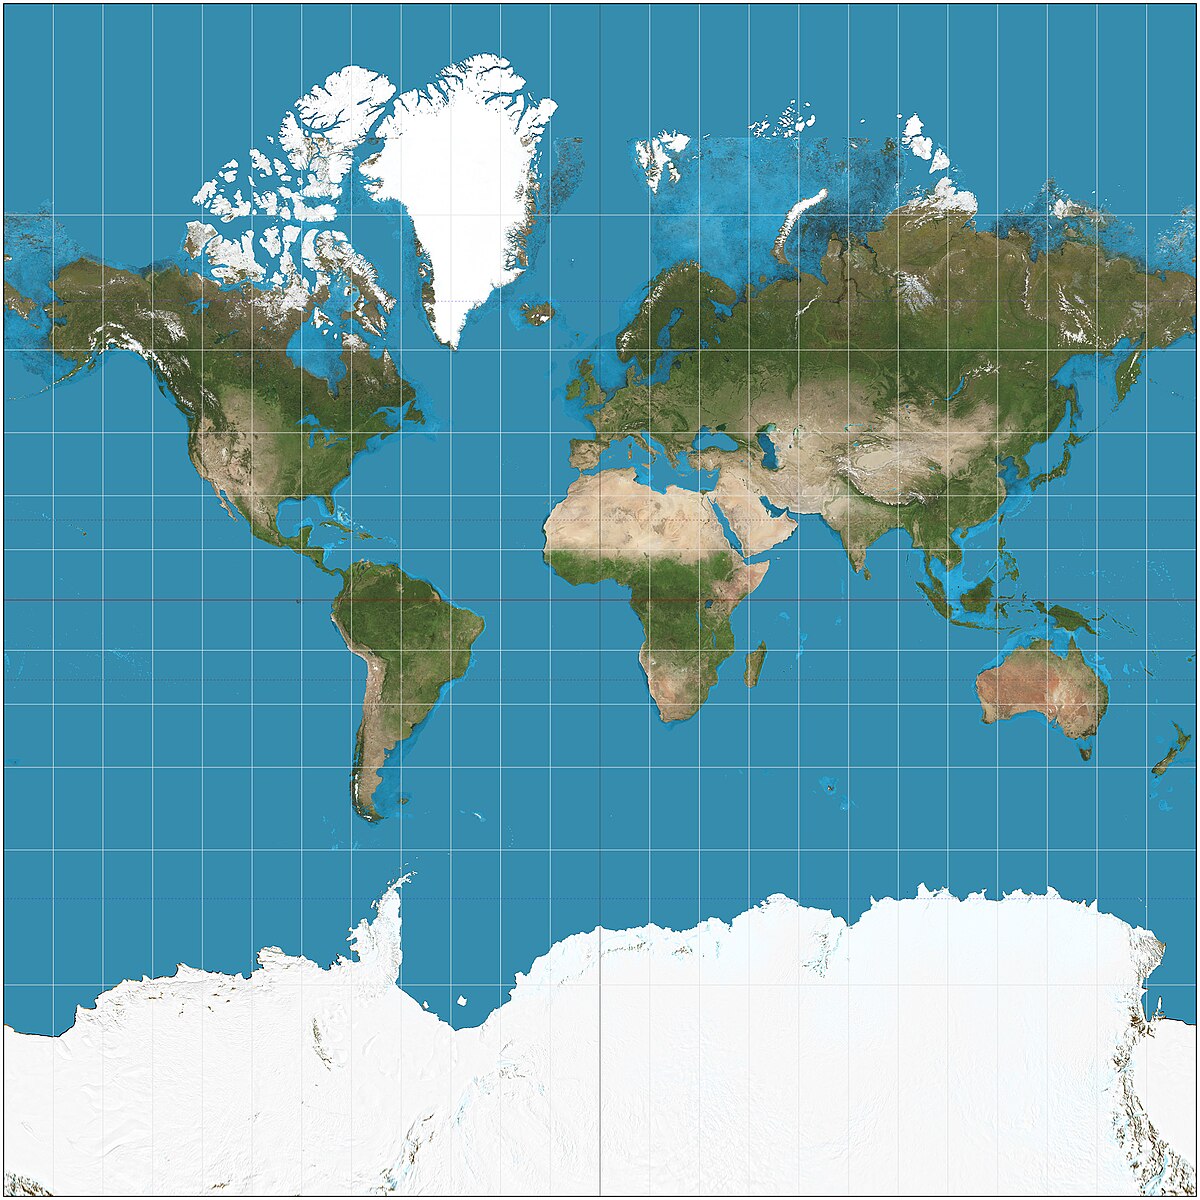 <p>Distorts poles of the globe, map Europe look more powerful</p>